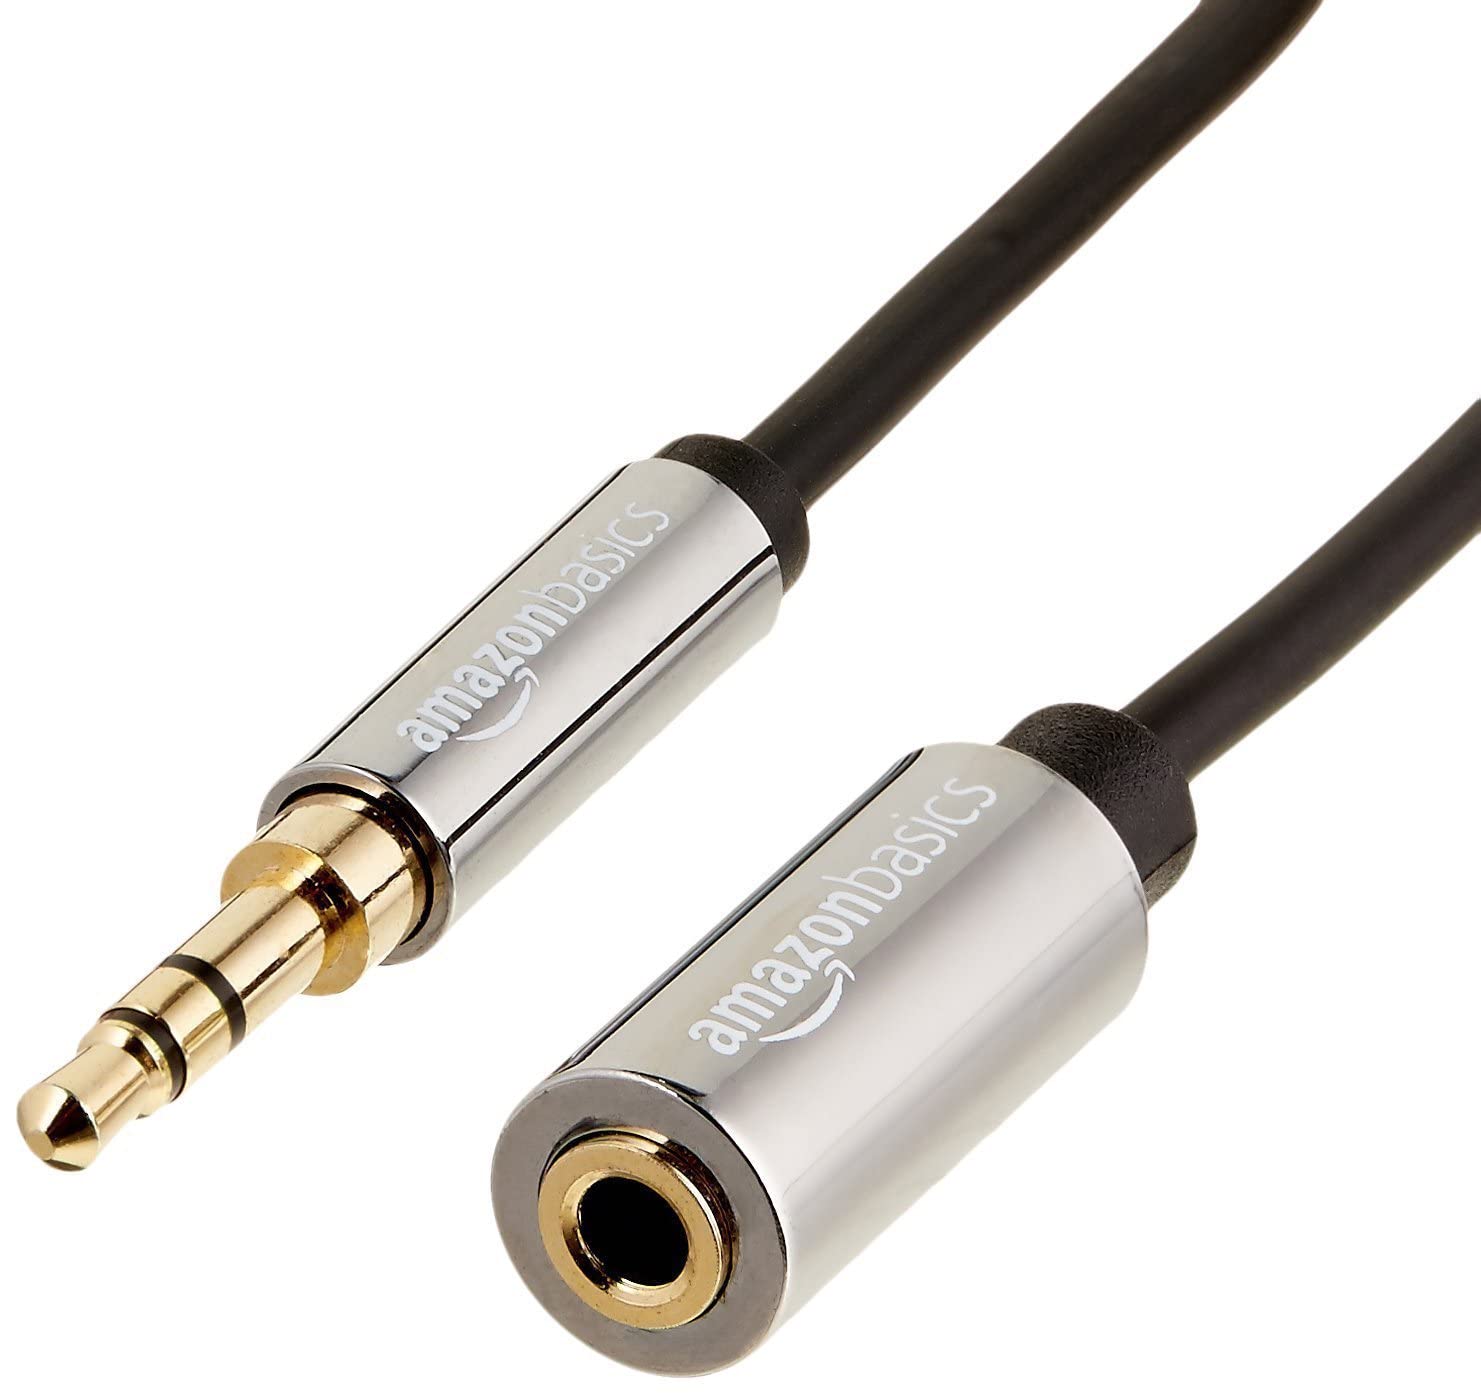 Male to Female Stereo Audio Cable (Aux Extension Cable) with Gold Plated Connectors- 6 Feet (3.5mm) - Does not support mic